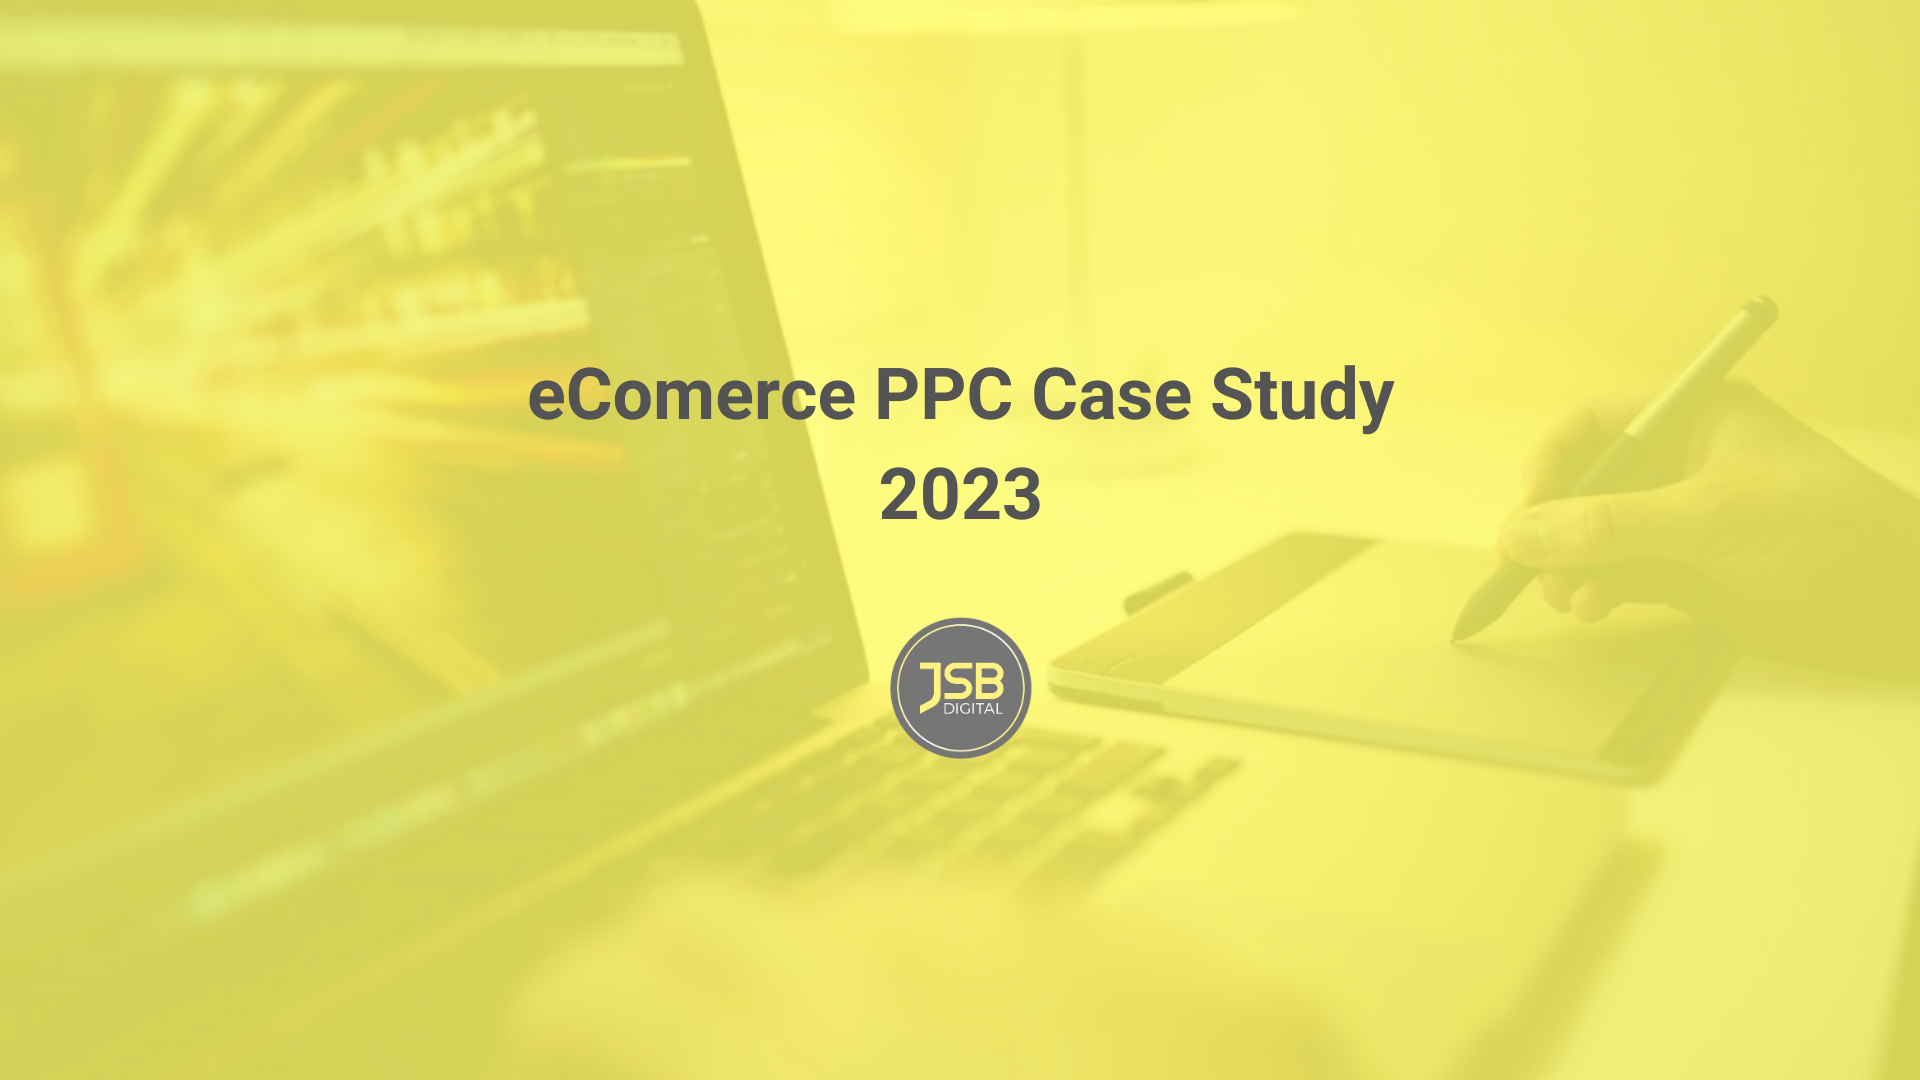 eCommerce Pay Per Click (PPC) Advertising Case Study: 2023